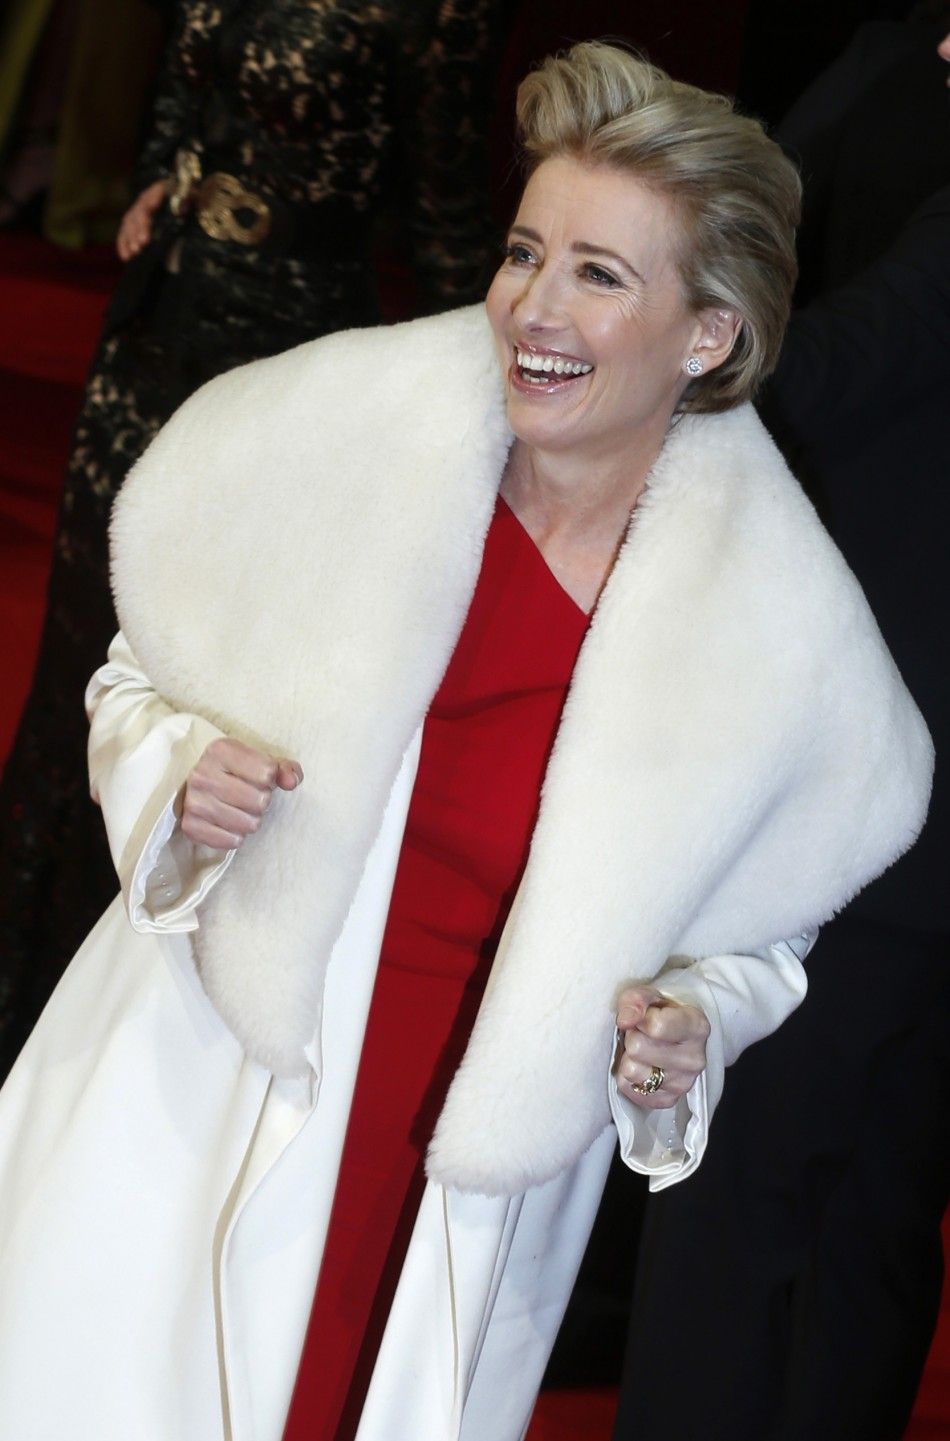 Emma Thompson arrives at the British Academy of Film and Arts BAFTA awards ceremony at the Royal Opera House in London